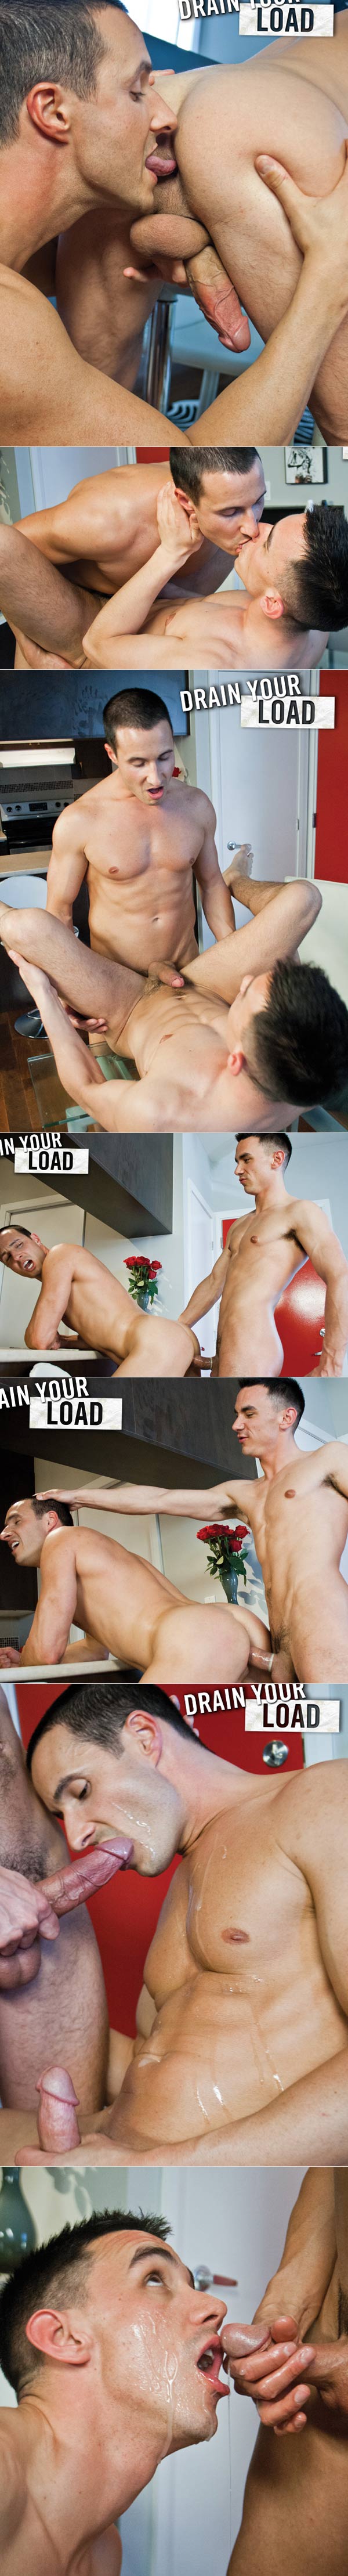 Drain Your Load (Adam Avery & Nick Ford) at LucasEntertainment.com